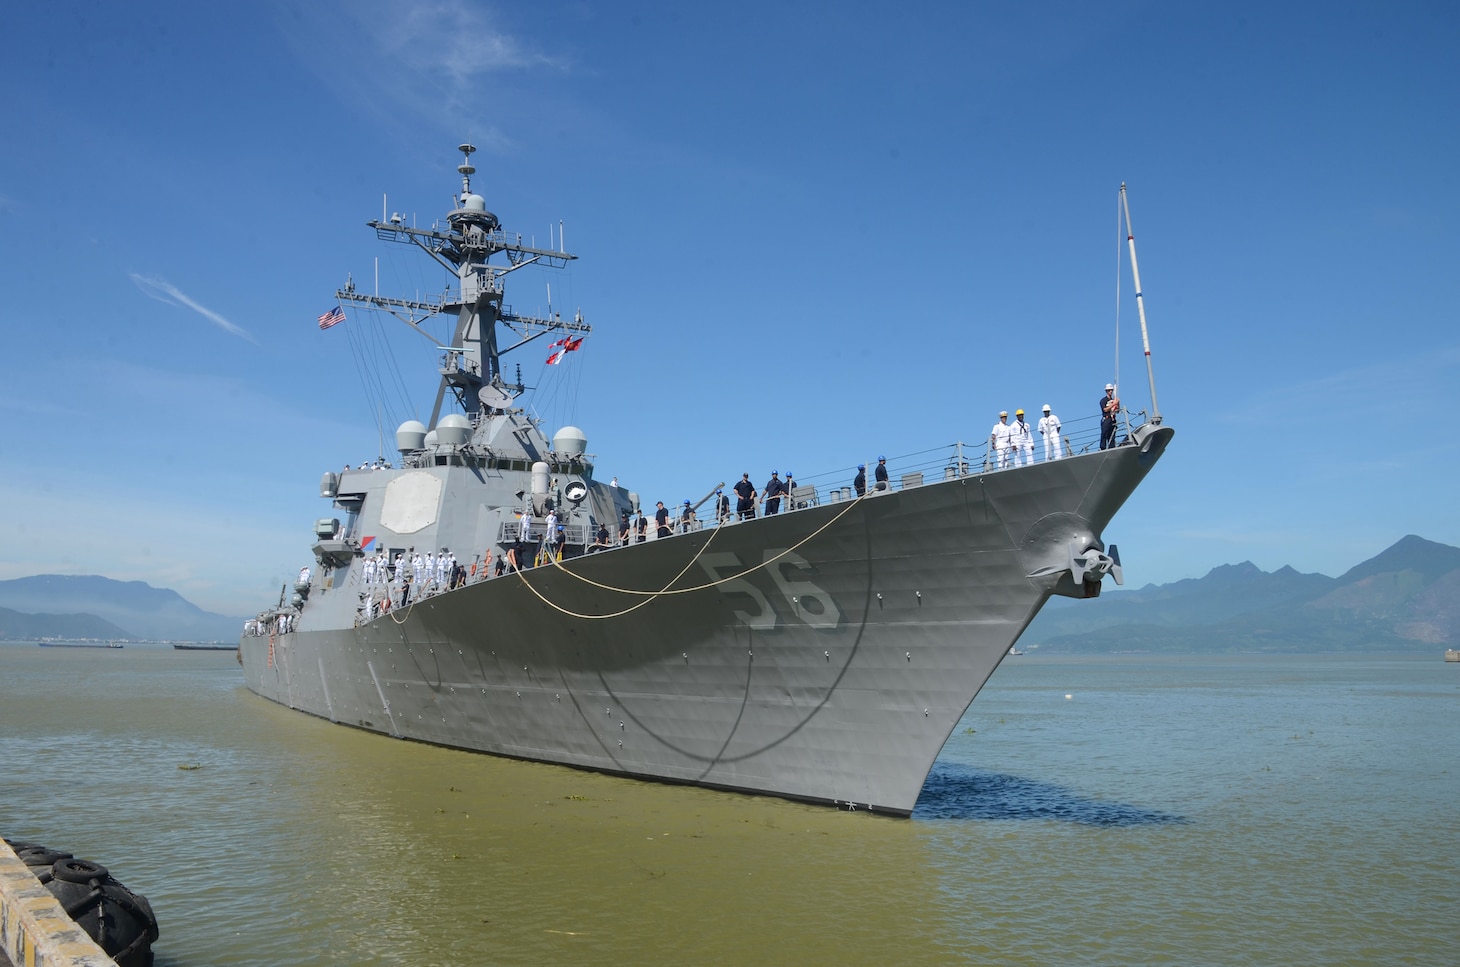 USS John S. McCain (DDG 56) arrives in Da Nang, Vietnam Sept. 29, 2016 for Naval Engagement Activitiy (NEA) Vietnam 2016. In its seventh year, NEA Vietnam is designed to foster mutual understanding, build confidence in the maritime domain and strengthen relationships between the U.S. Navy, Vietnam People's navy and the local community. 